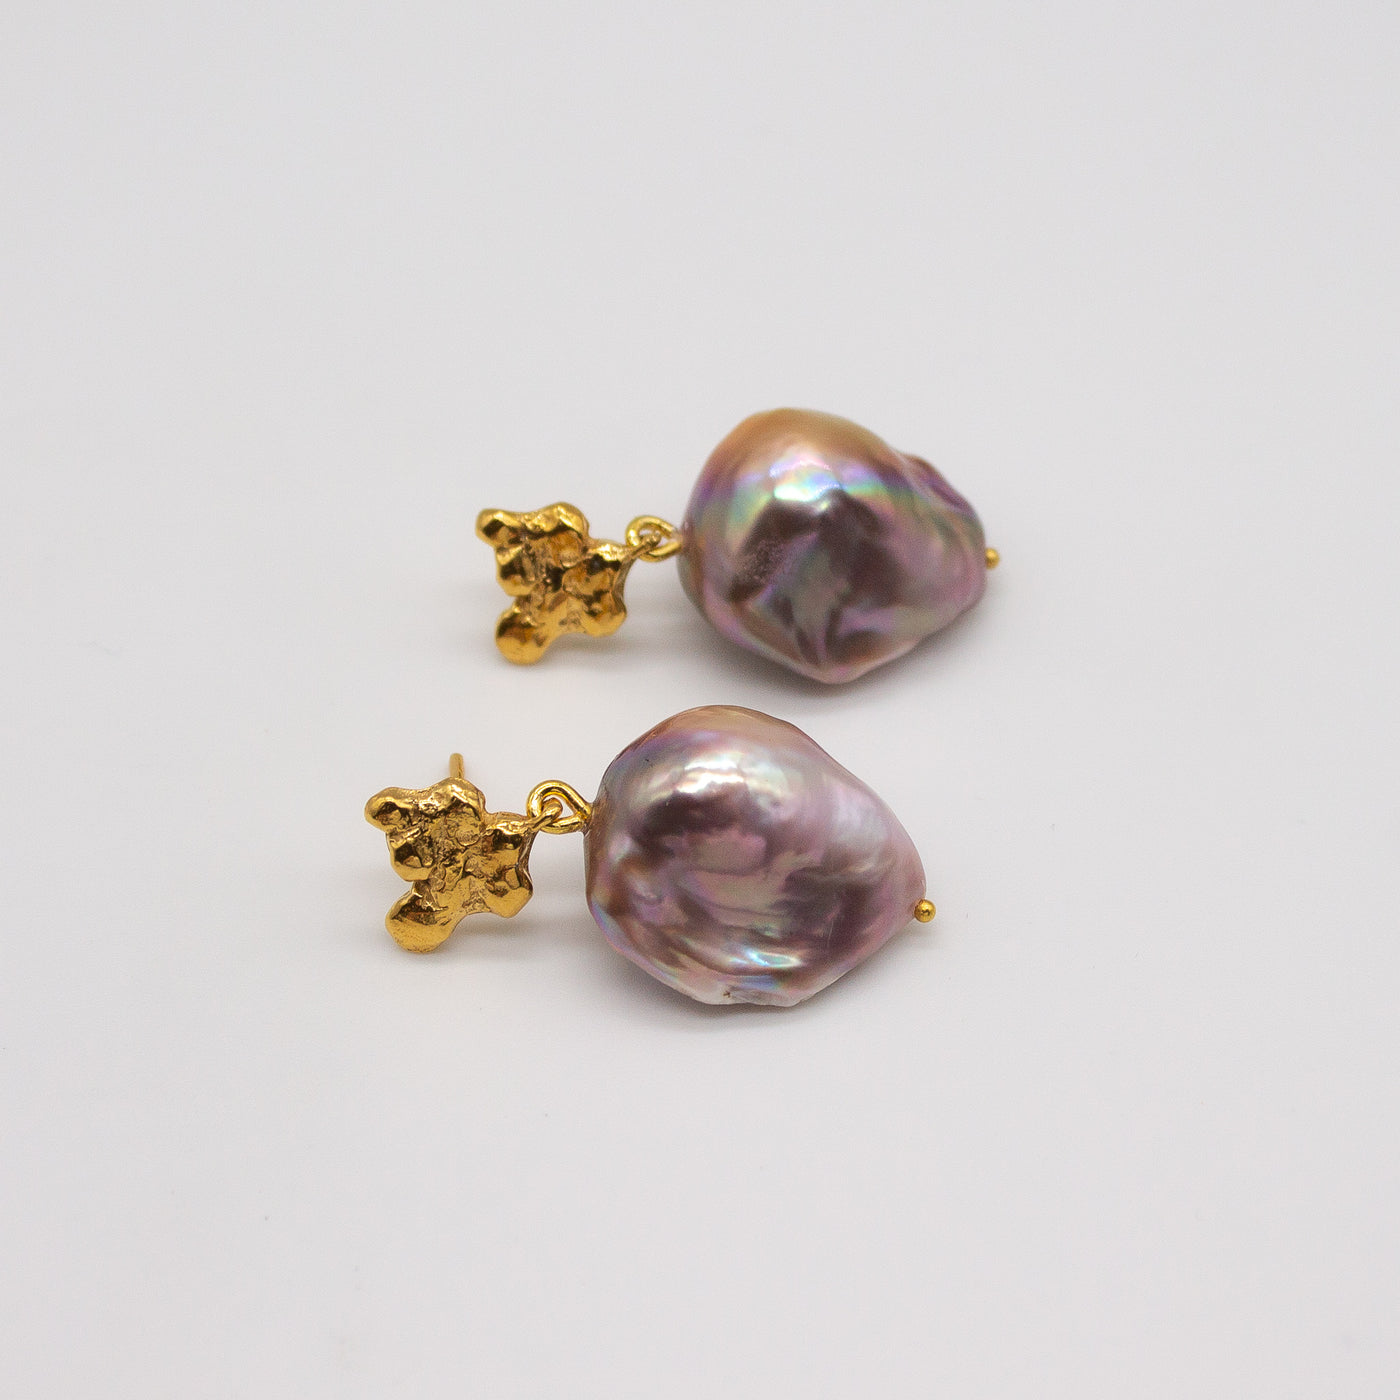 MARIENLUND // Gold-plated earrings with peach-colored baroque Fireball pearls